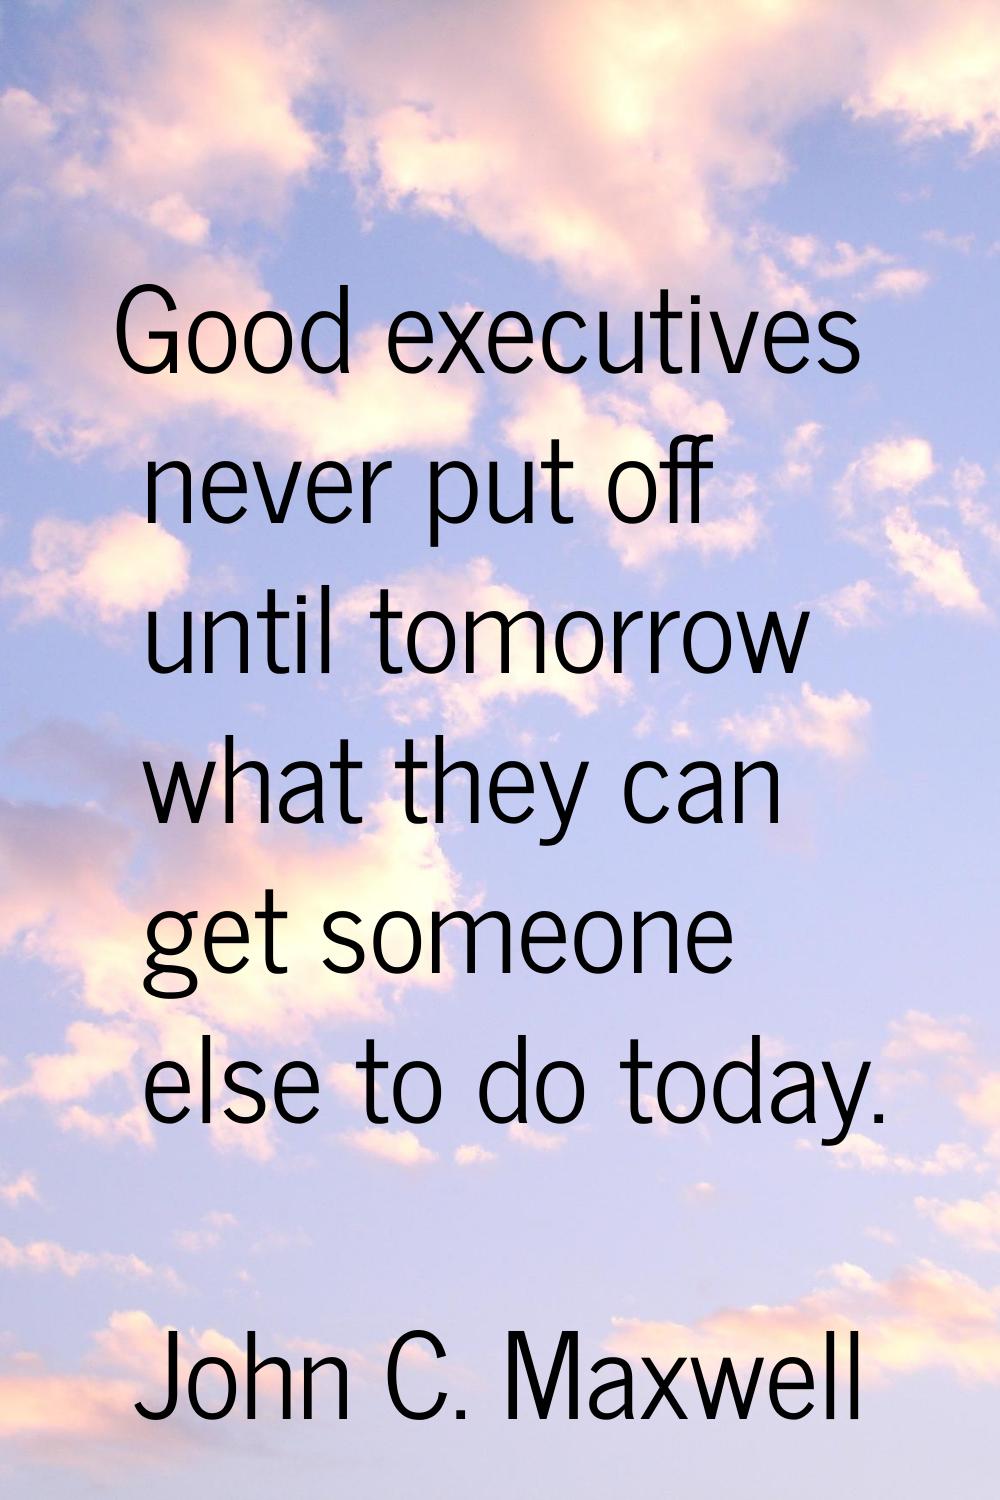 Good executives never put off until tomorrow what they can get someone else to do today.